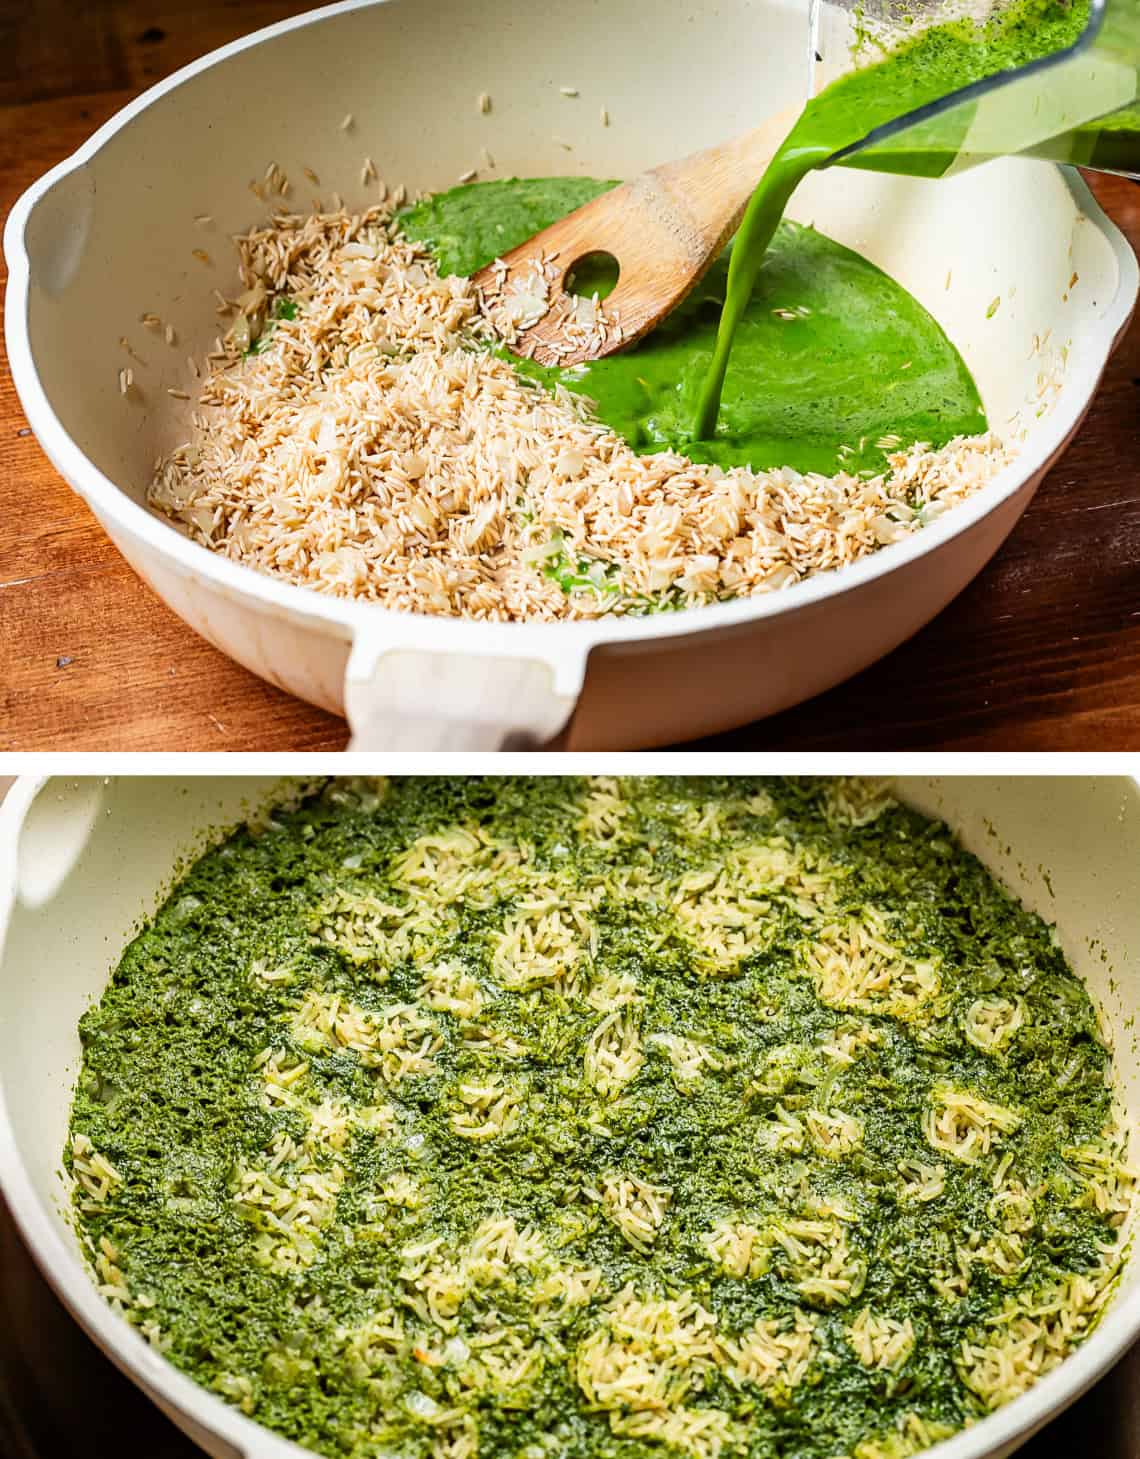 top pic pouring green liquid from blender into pot with rice, bottom cooked rice in green liquid unstirred.